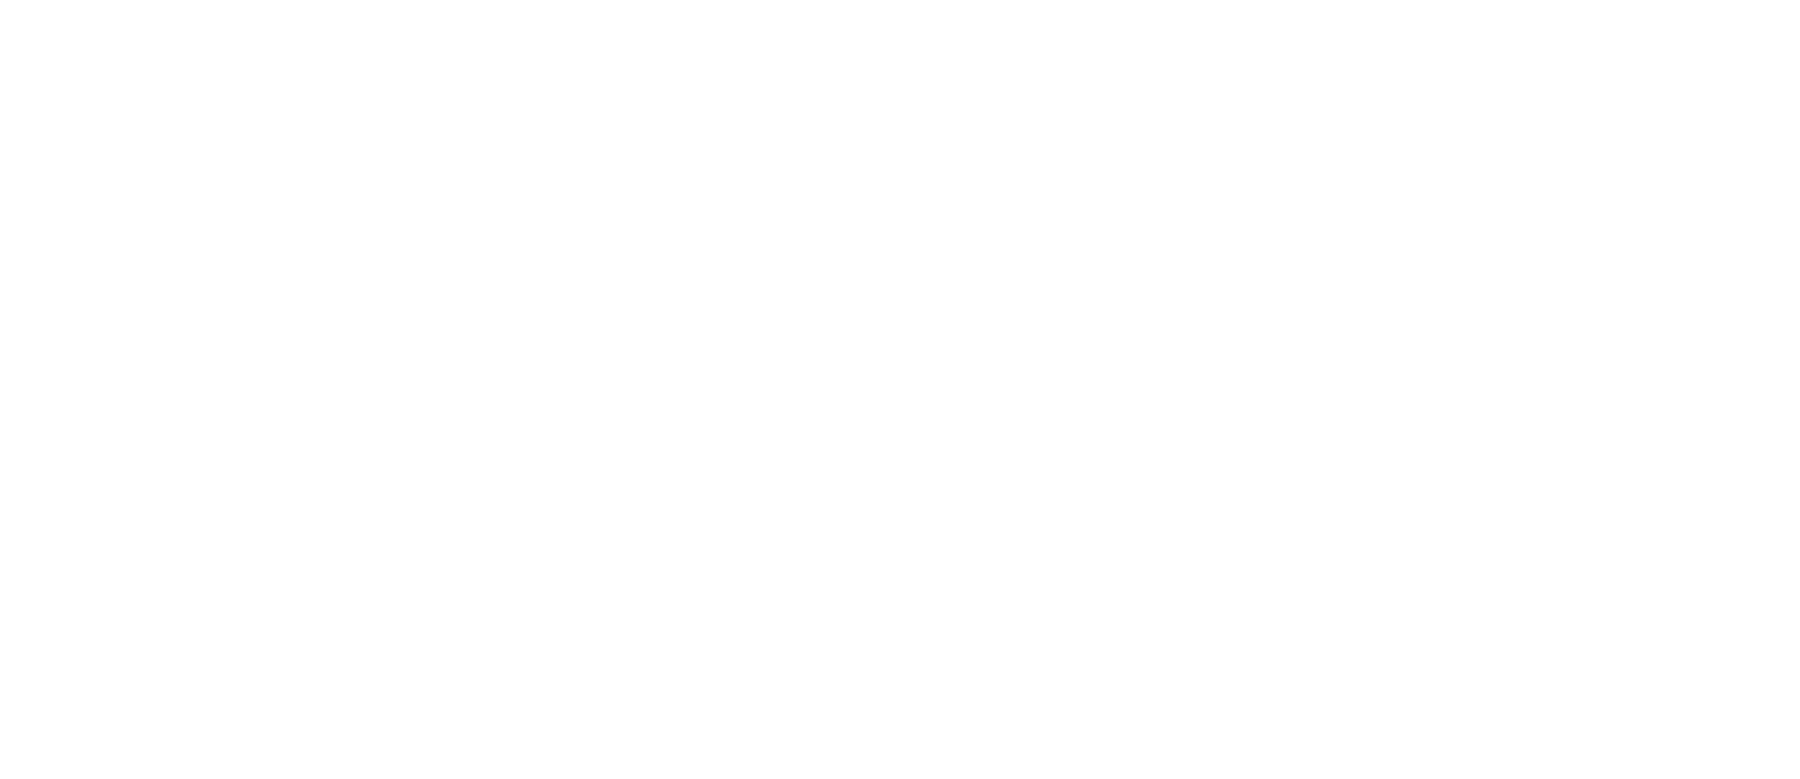 The Bad Bump title